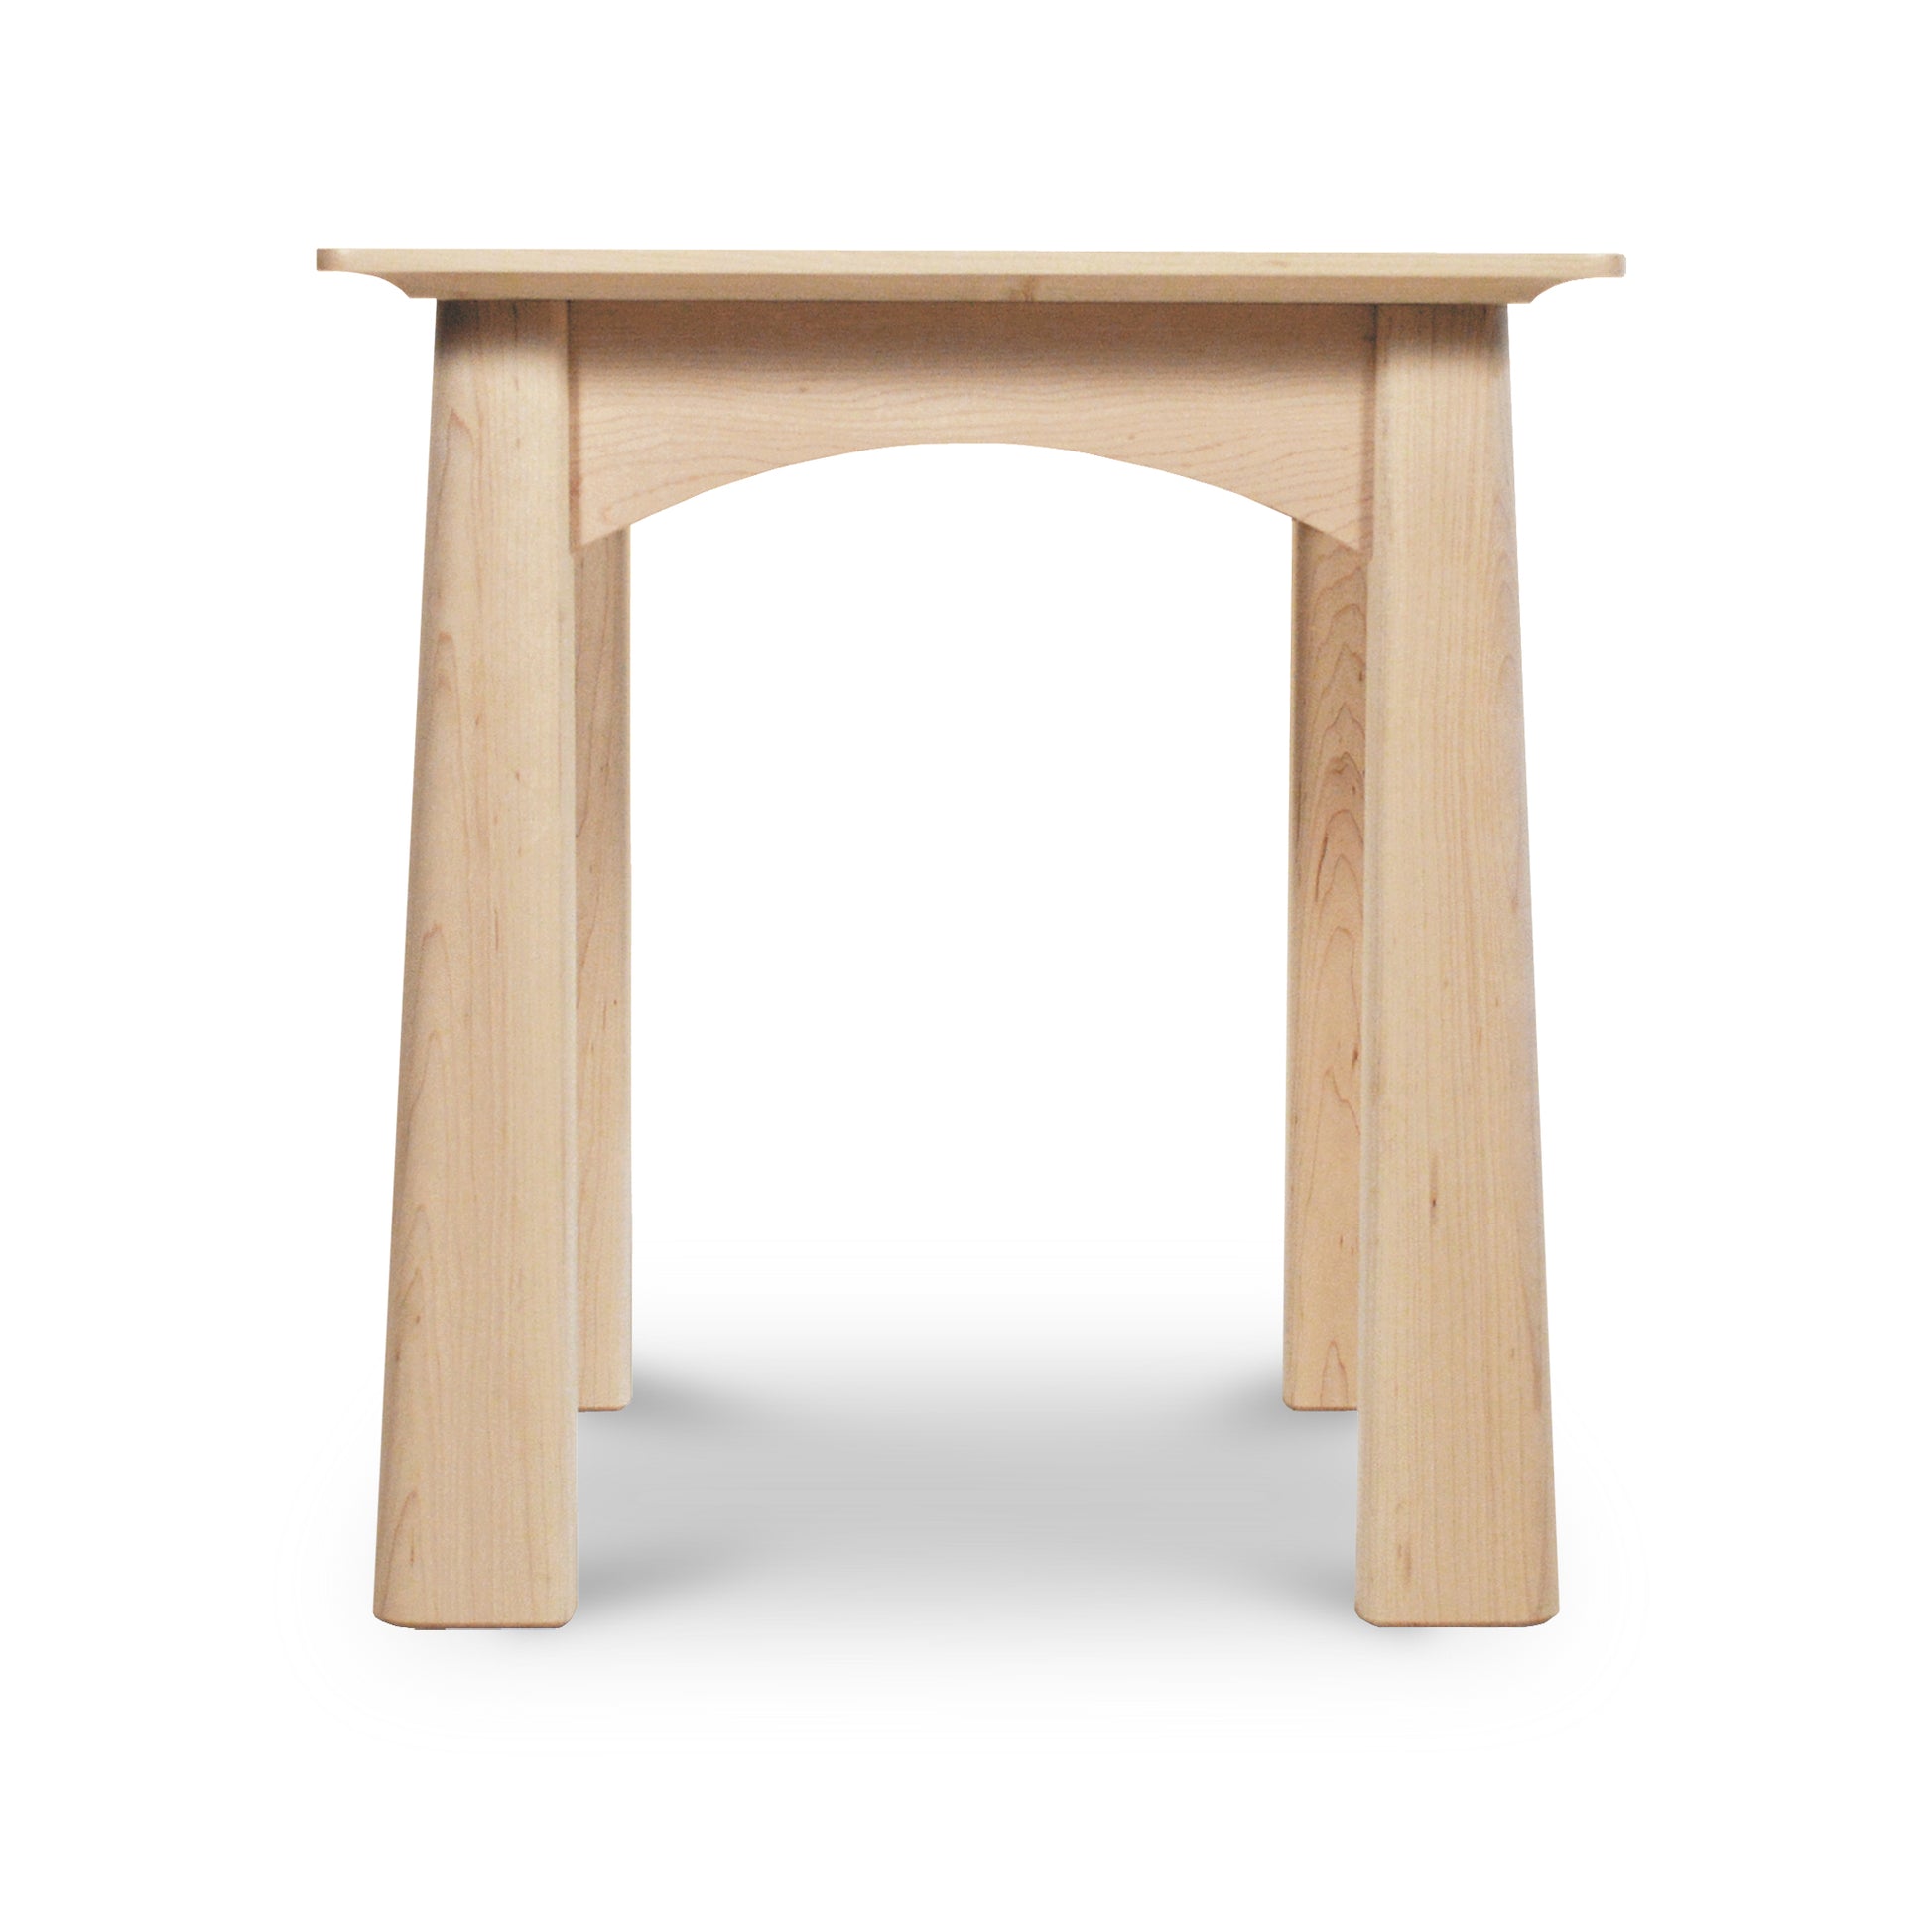 A simple Cherry Moon End Table, handmade by Maple Corner Woodworks in Vermont with a curved seat and sturdy, arched legs, isolated on a white background.